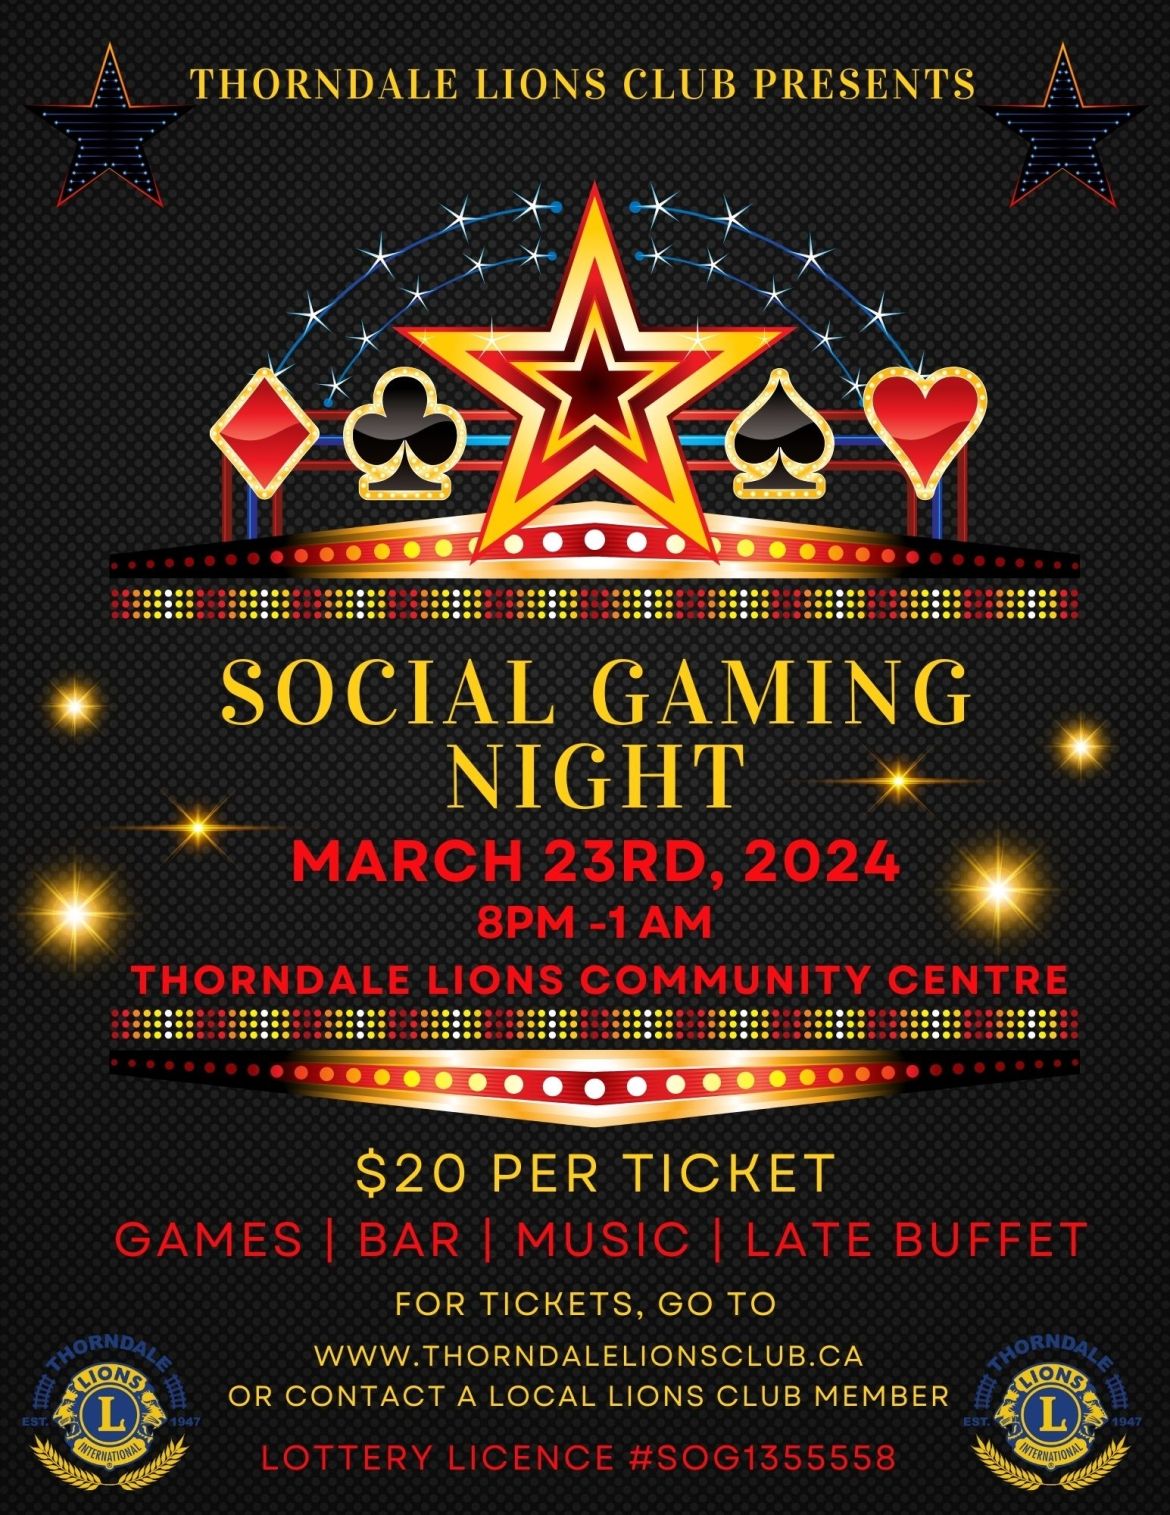 Thordale Lions are hosting a Social Games Night March 23rd. Win games of chance and enjoy a late night buffet.